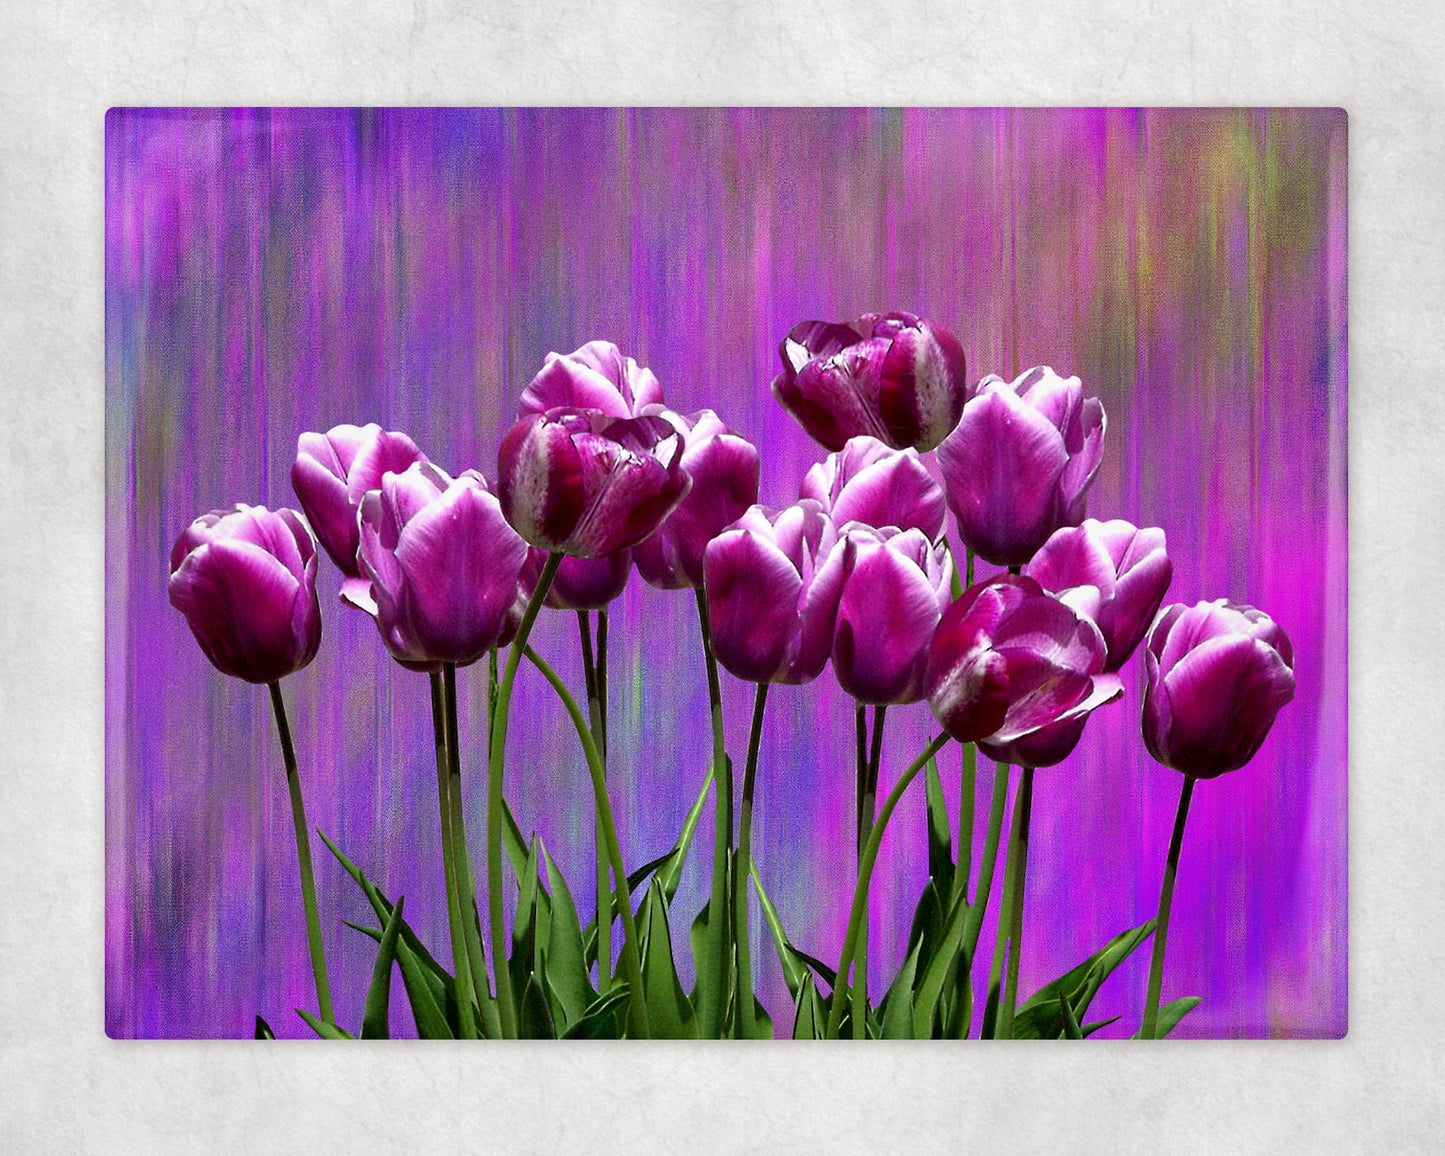 Purple Tulips Flower Garden Art Decorative Ceramic Tile with Optional Easel Back - 6x8 inches